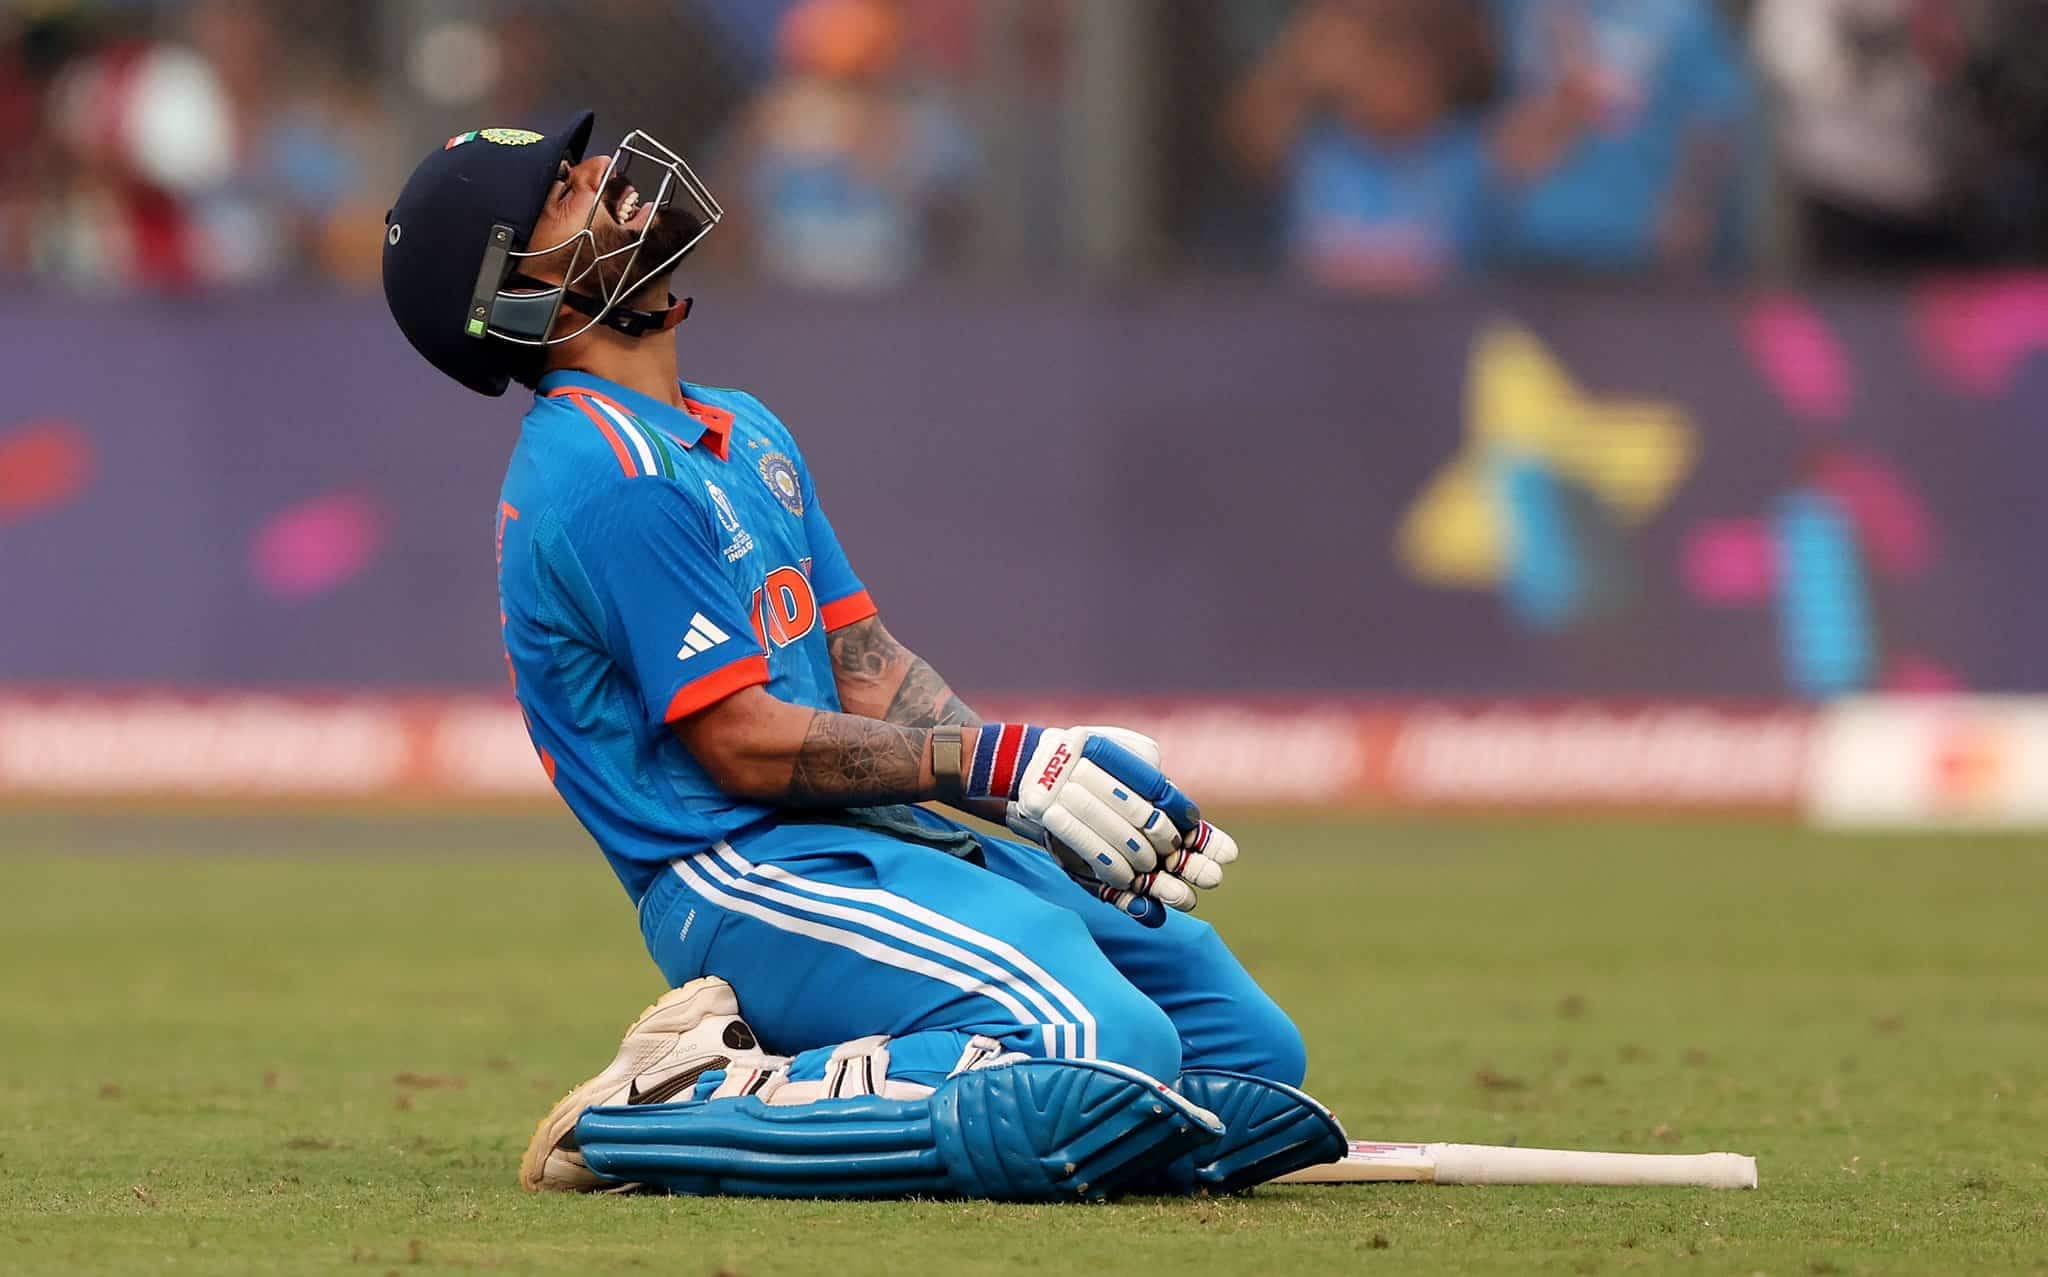 Virat Kohli Used A 'Special Wrist Device' For His 50th ODI Hundred? All Details Revealed